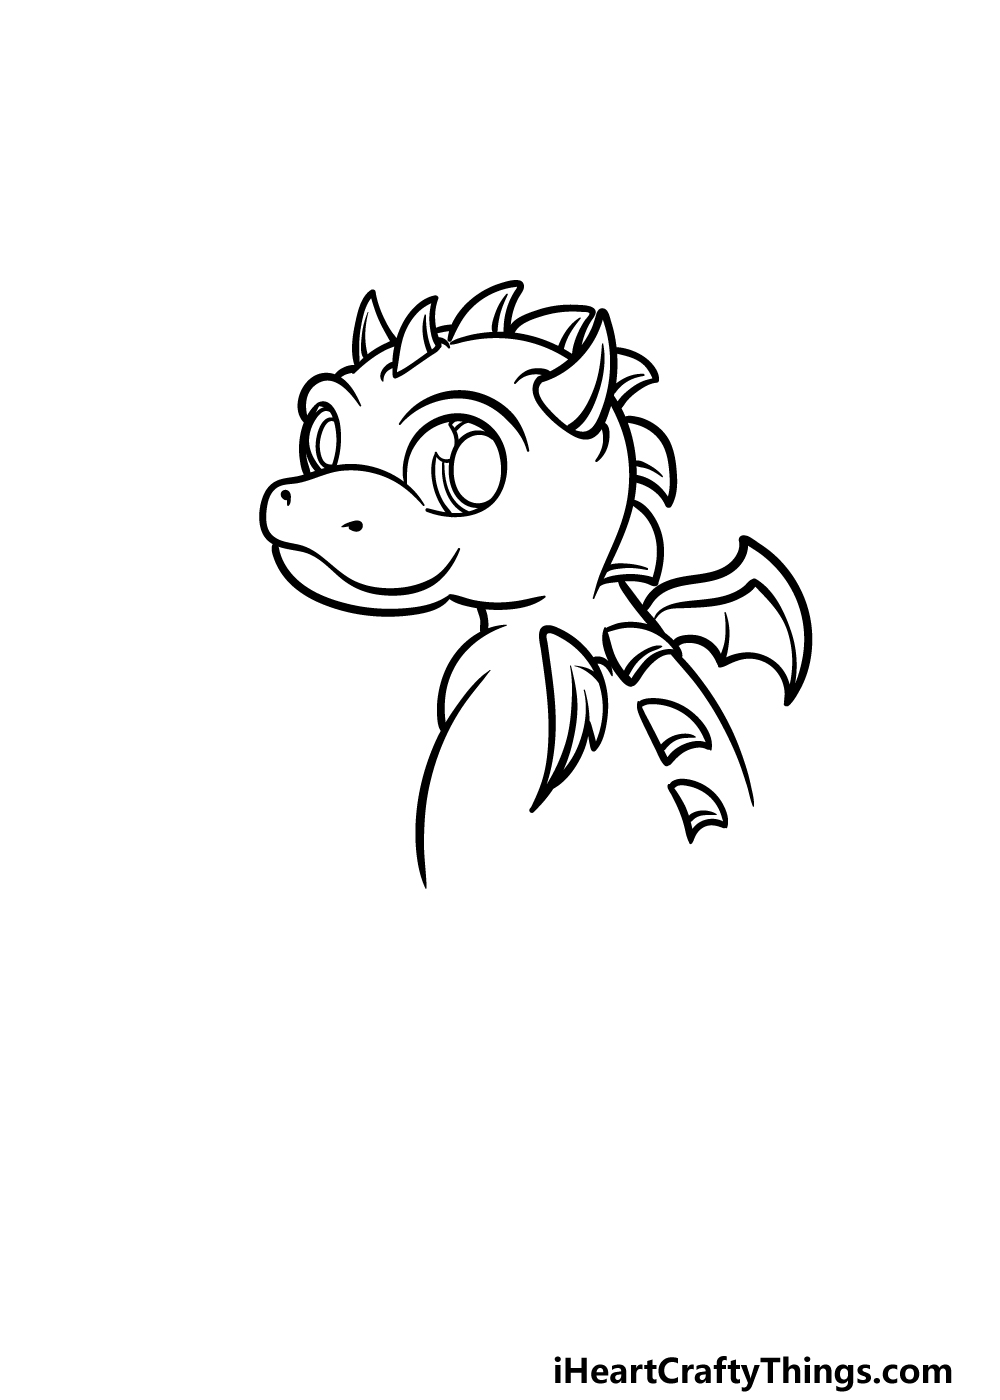 Baby Dragon Drawing - How To Draw A Baby Dragon Step By Step